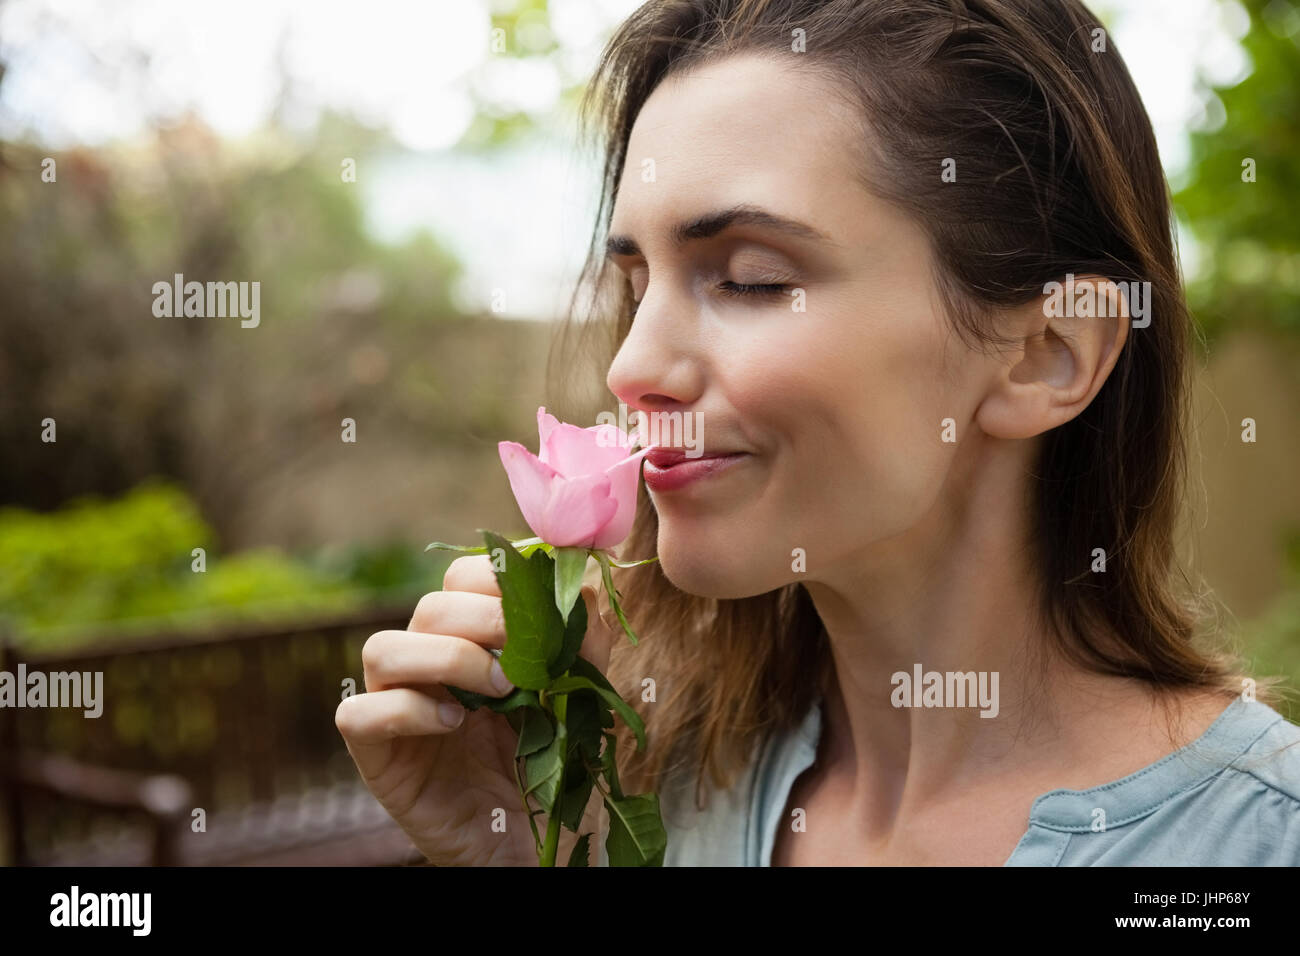 Close-up of beautiful woman with eyes closed smelling pink rose at garden Stock Photo